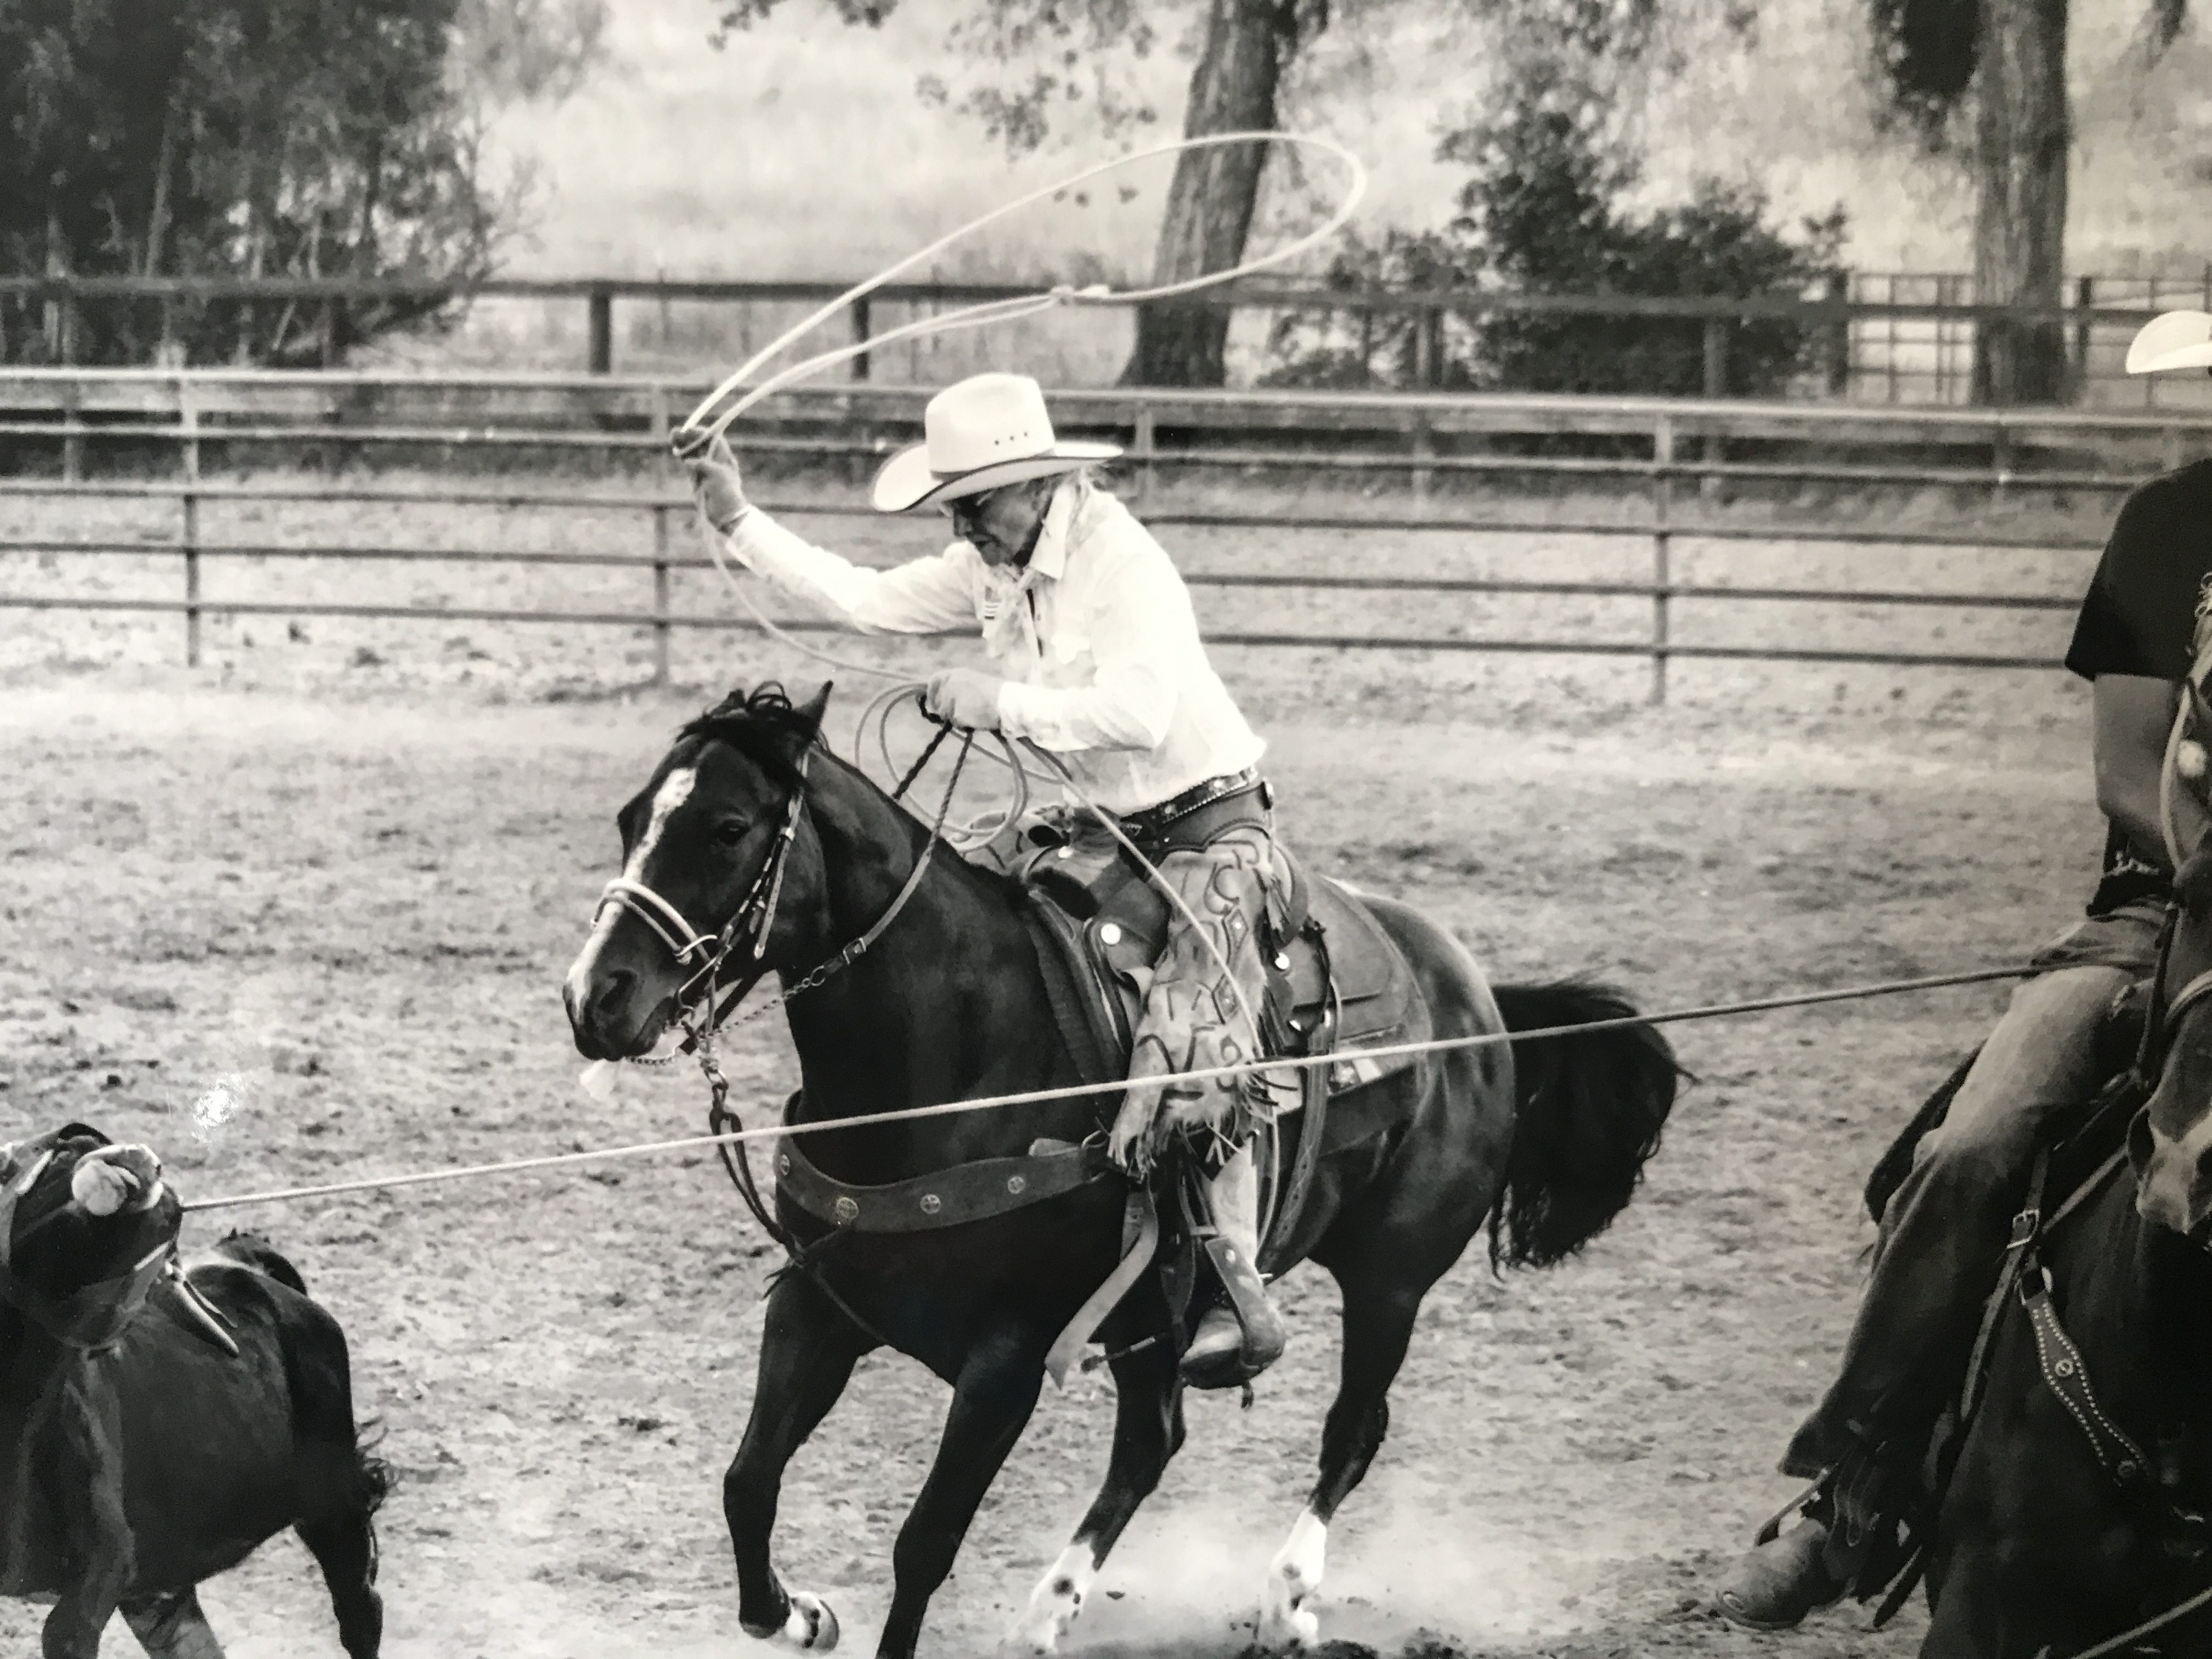 Local cowgirl Audrey Griffin, 80, has displayed toughness, courage her entire life